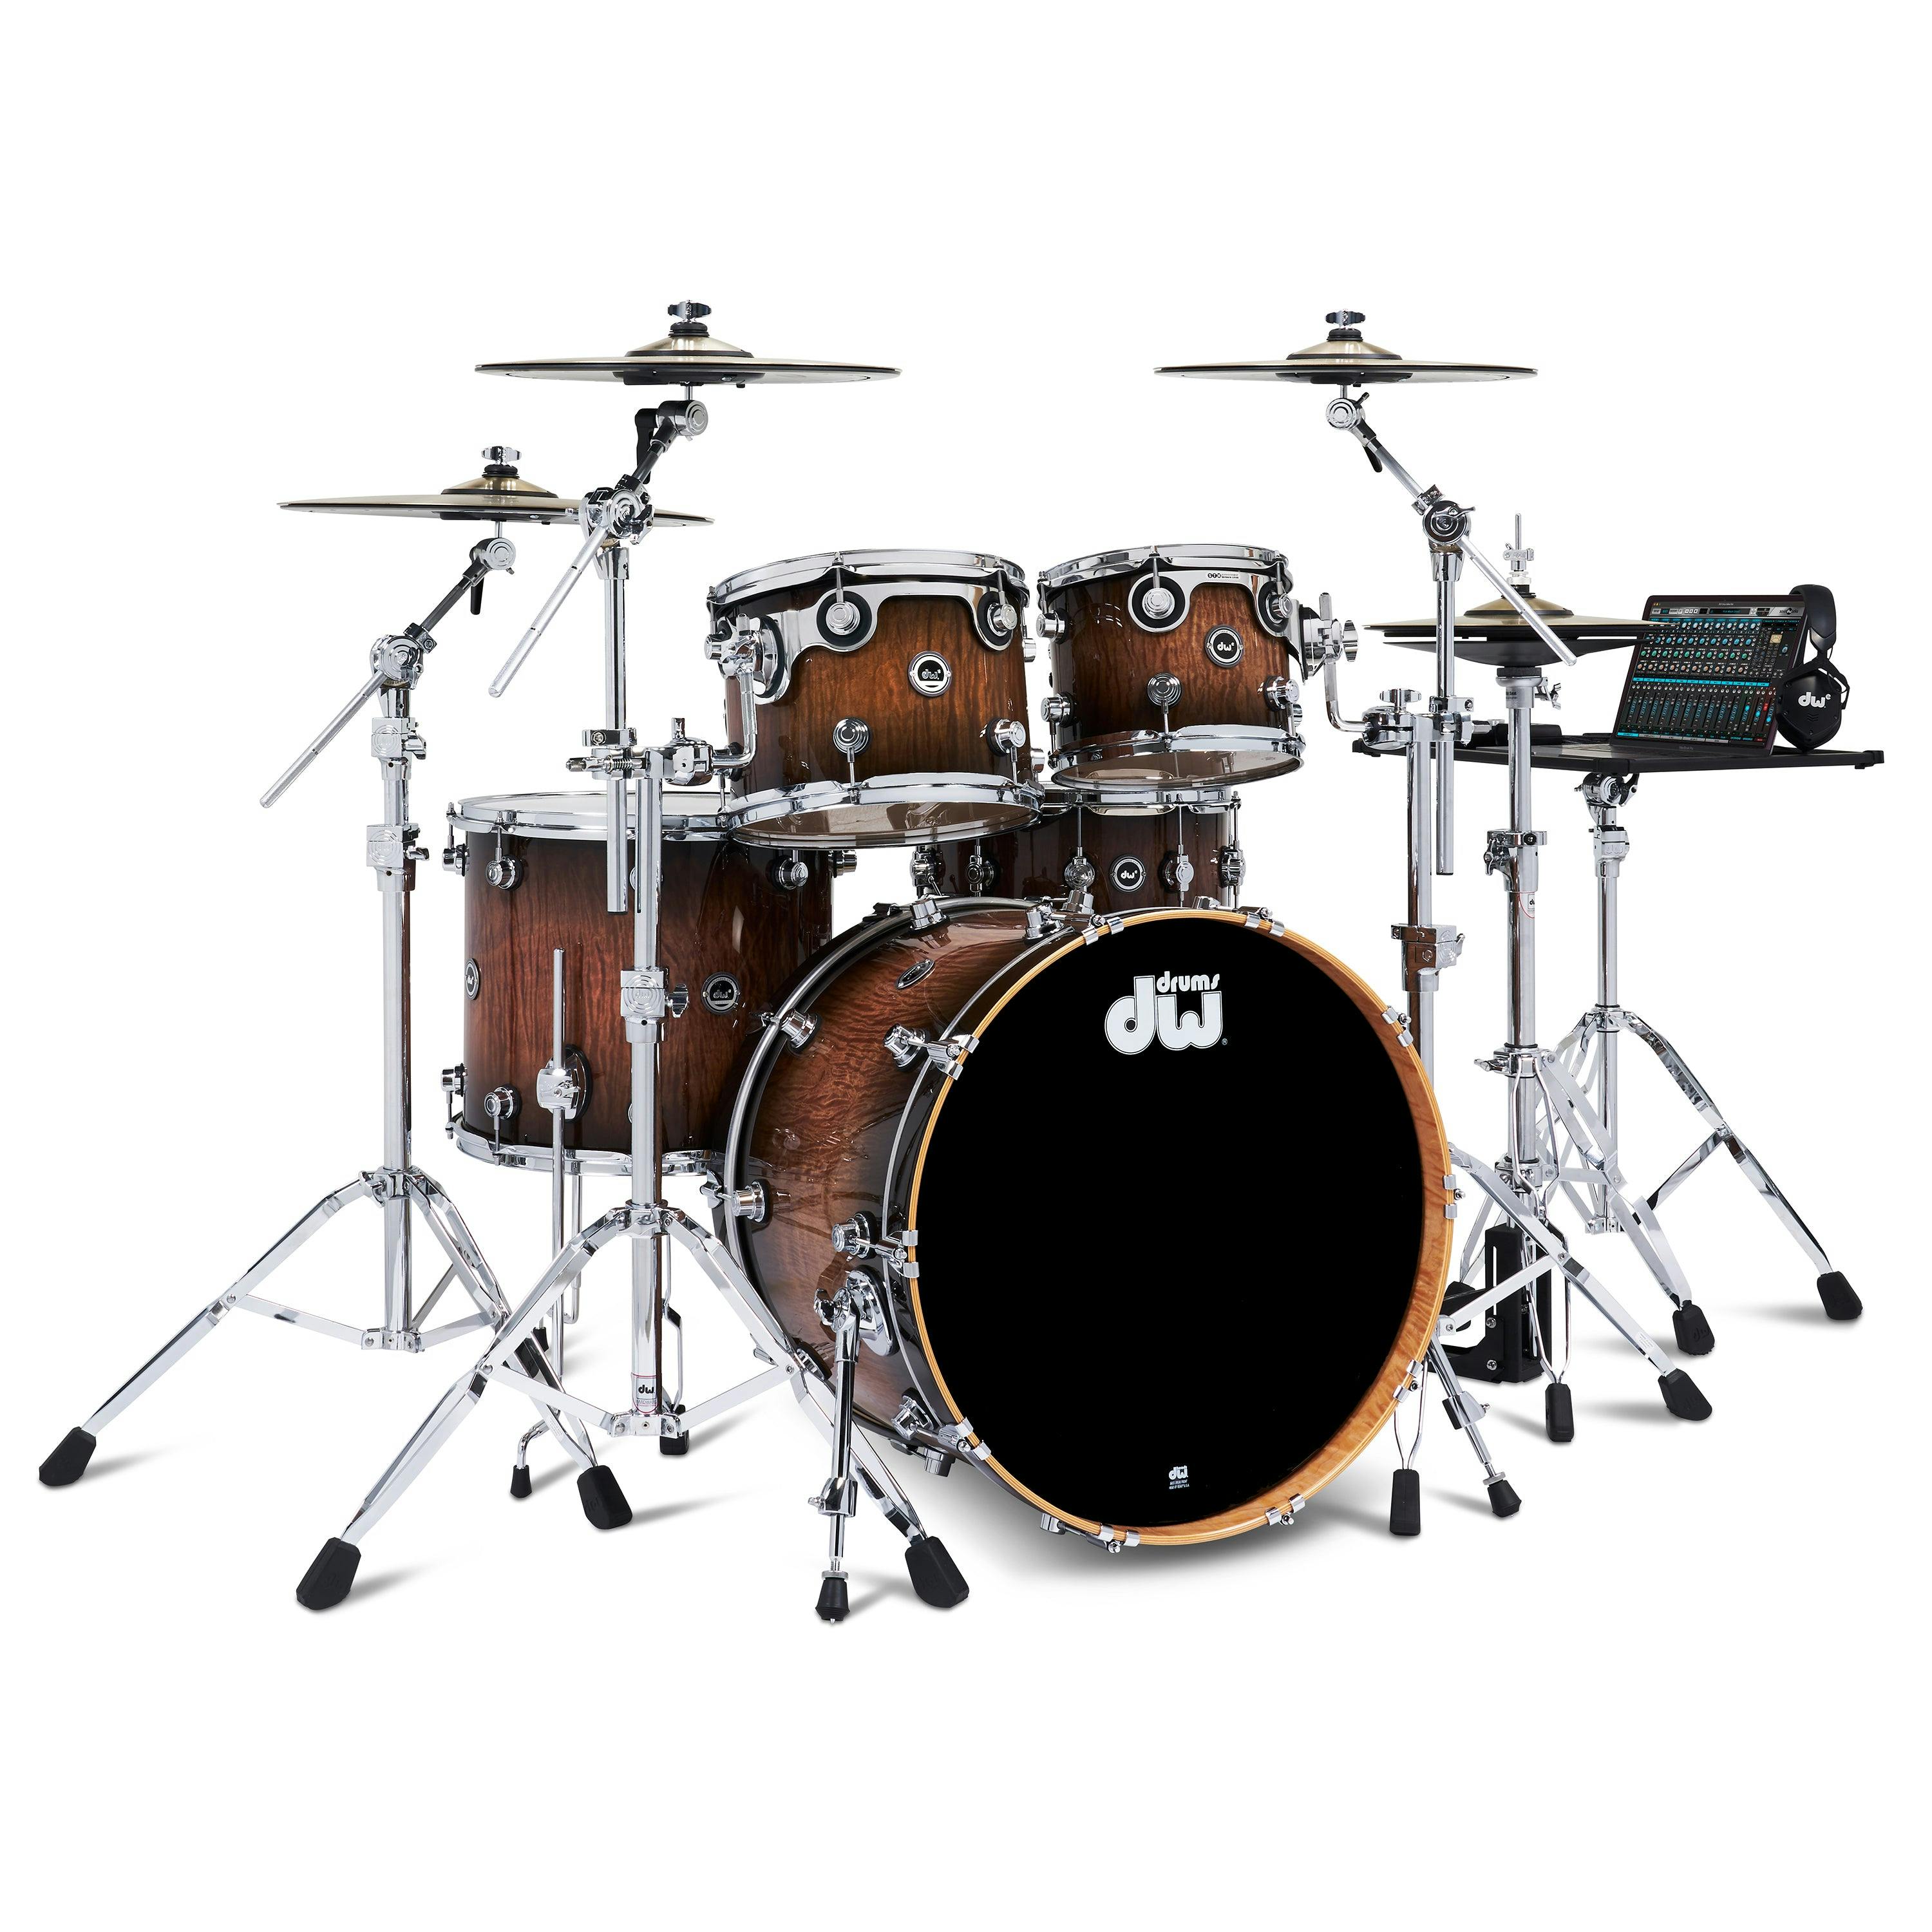 invisible drumkit! : r/drums